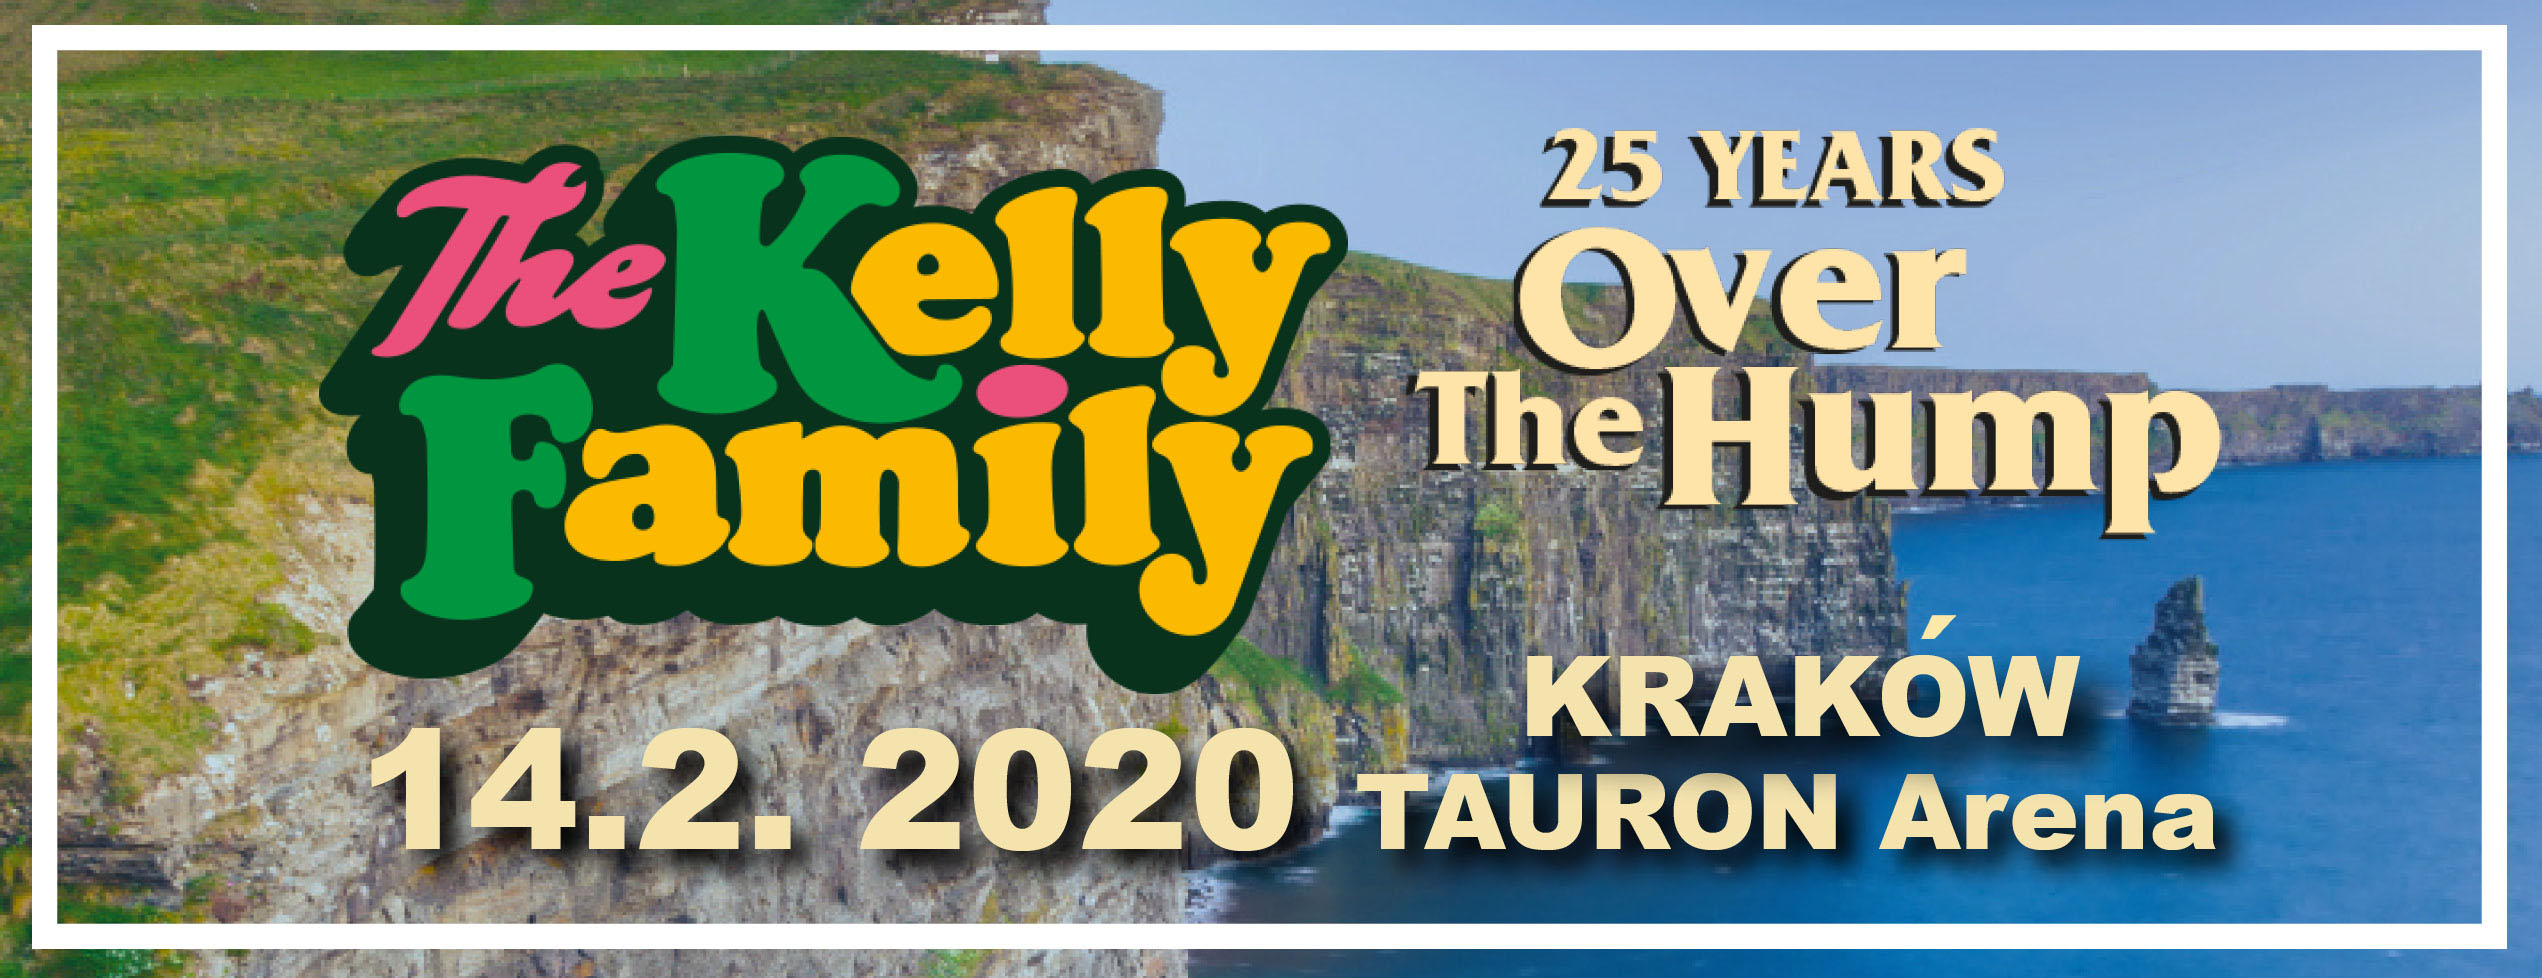 The Kelly Family 25 years Over the Hump World Tour